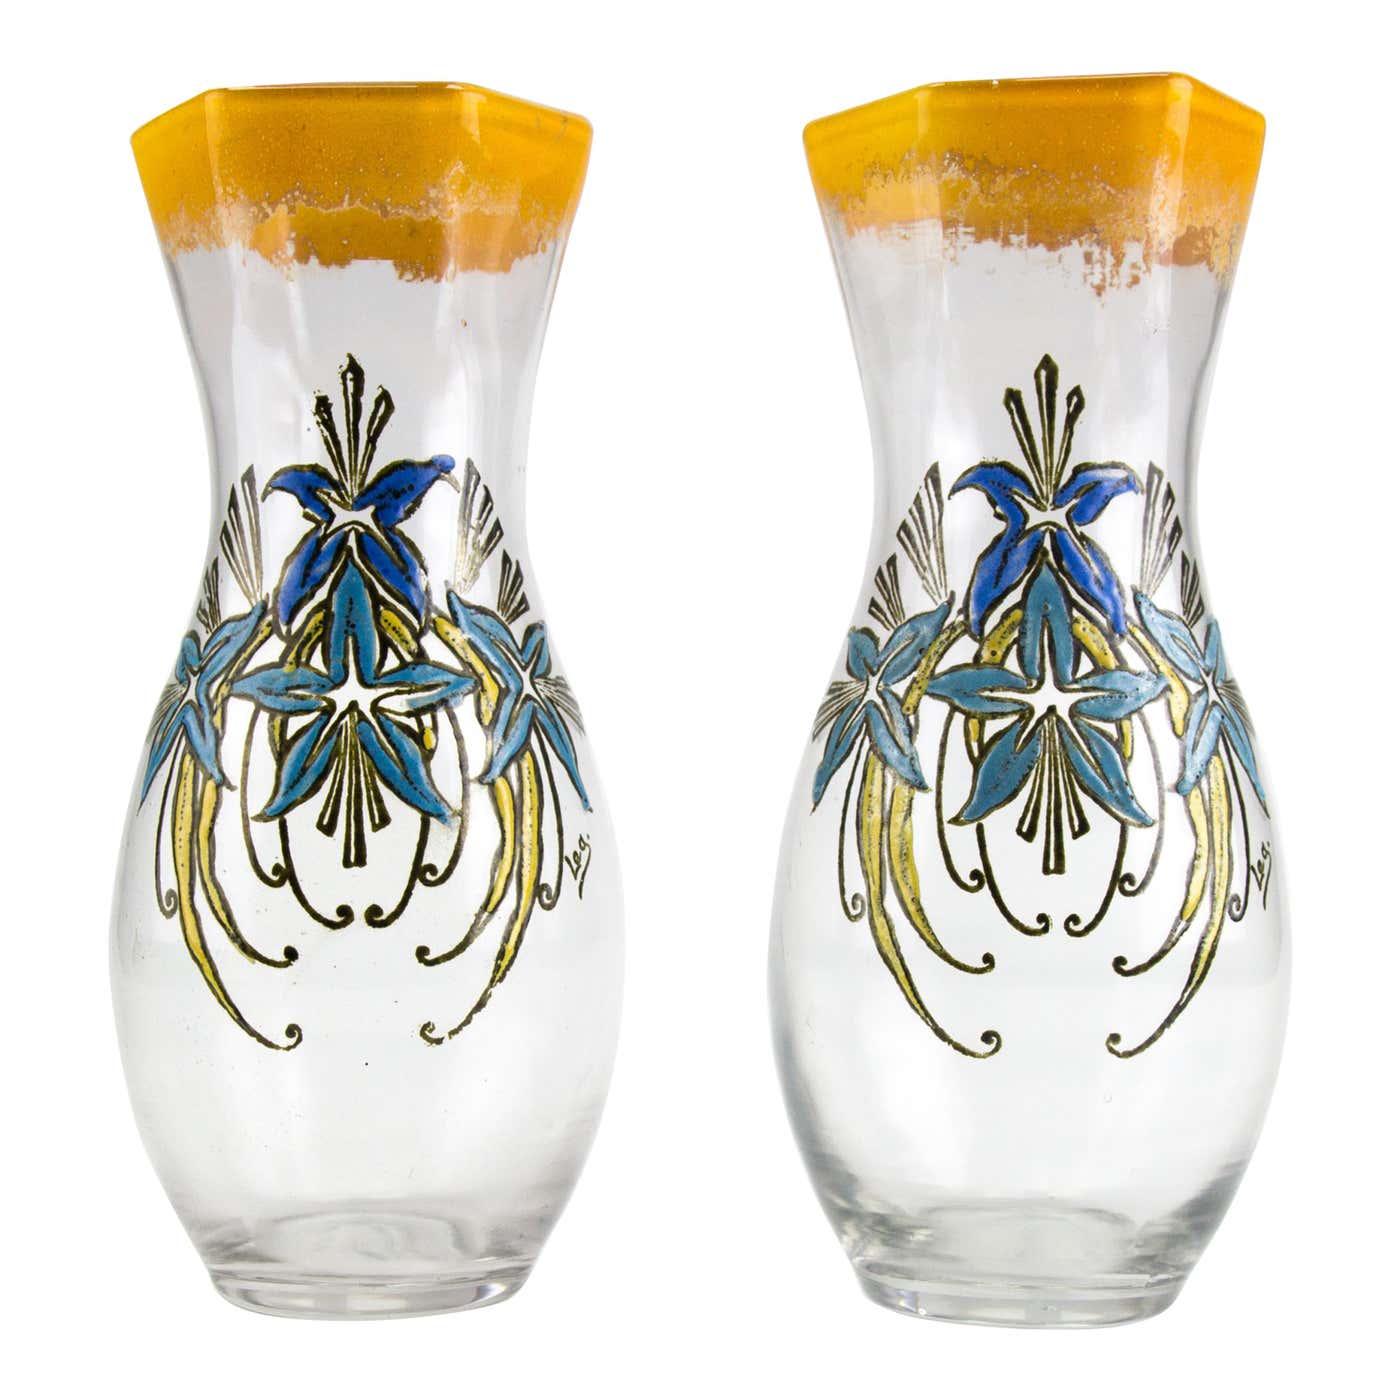 Pair Of French Art Nouveau Legras Enameled Glass Vases Early 20th